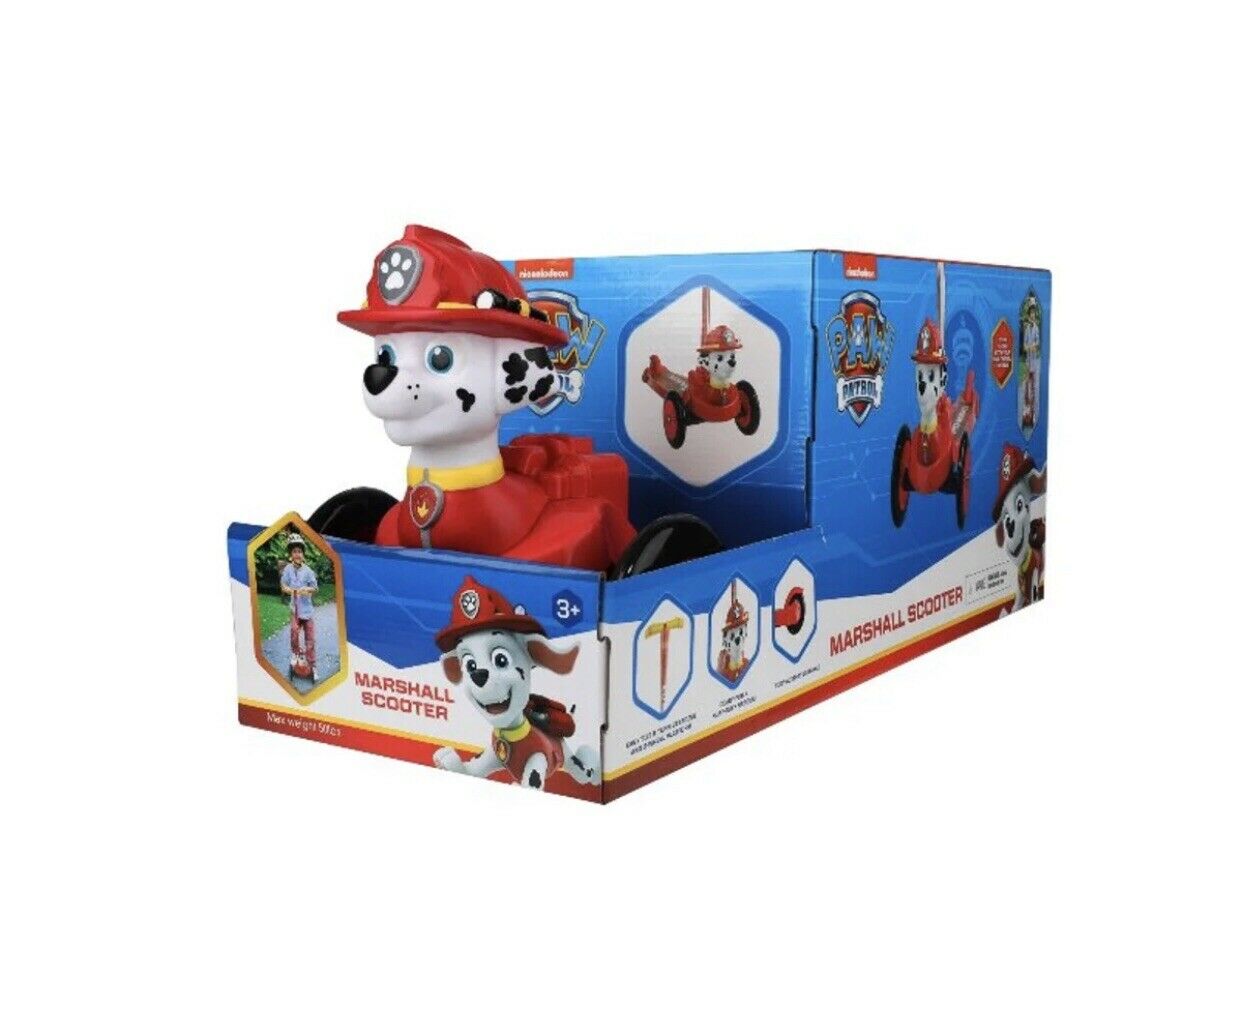 Paw Patrol 3d Marshall Scooter With 3 Wheels And Tilt To Turn For Ages 3 To 5